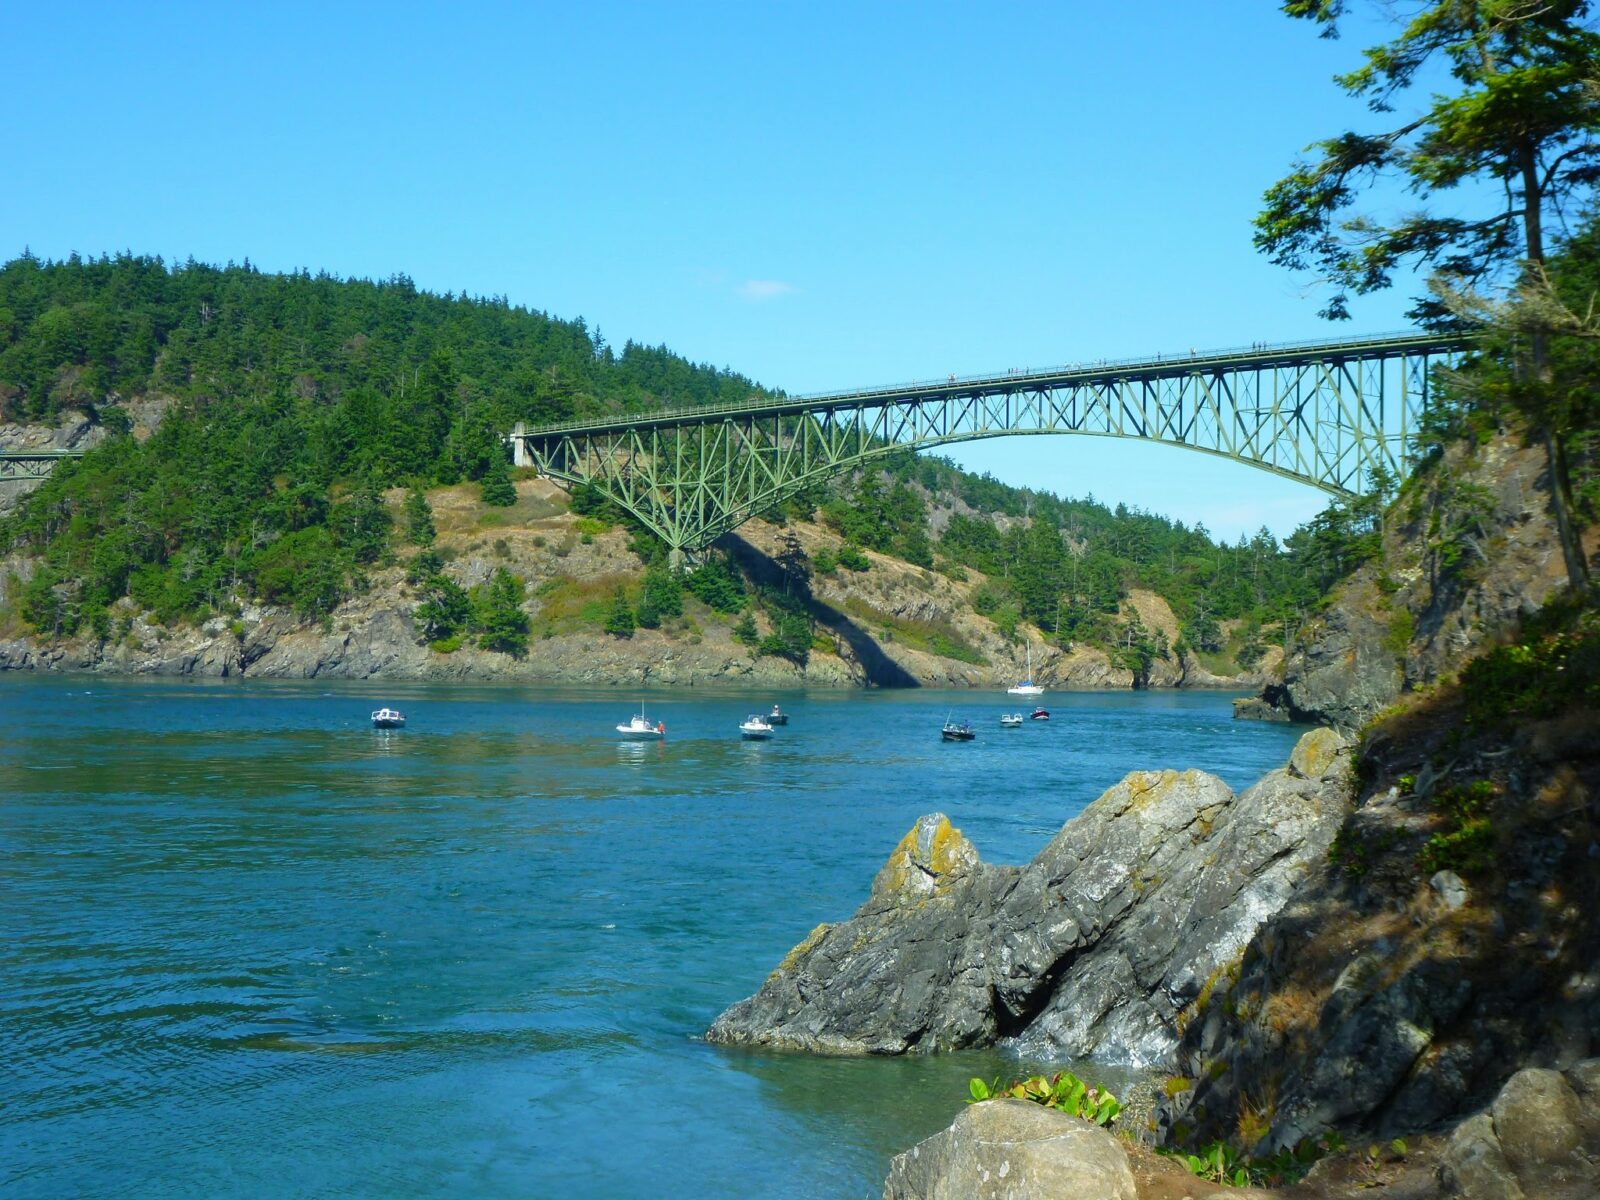 A green steel bridge is high above the water between two rocky and forested hills on each side of a narrow passage. There are a few fishing boats and one sailboat in the water under the bridge